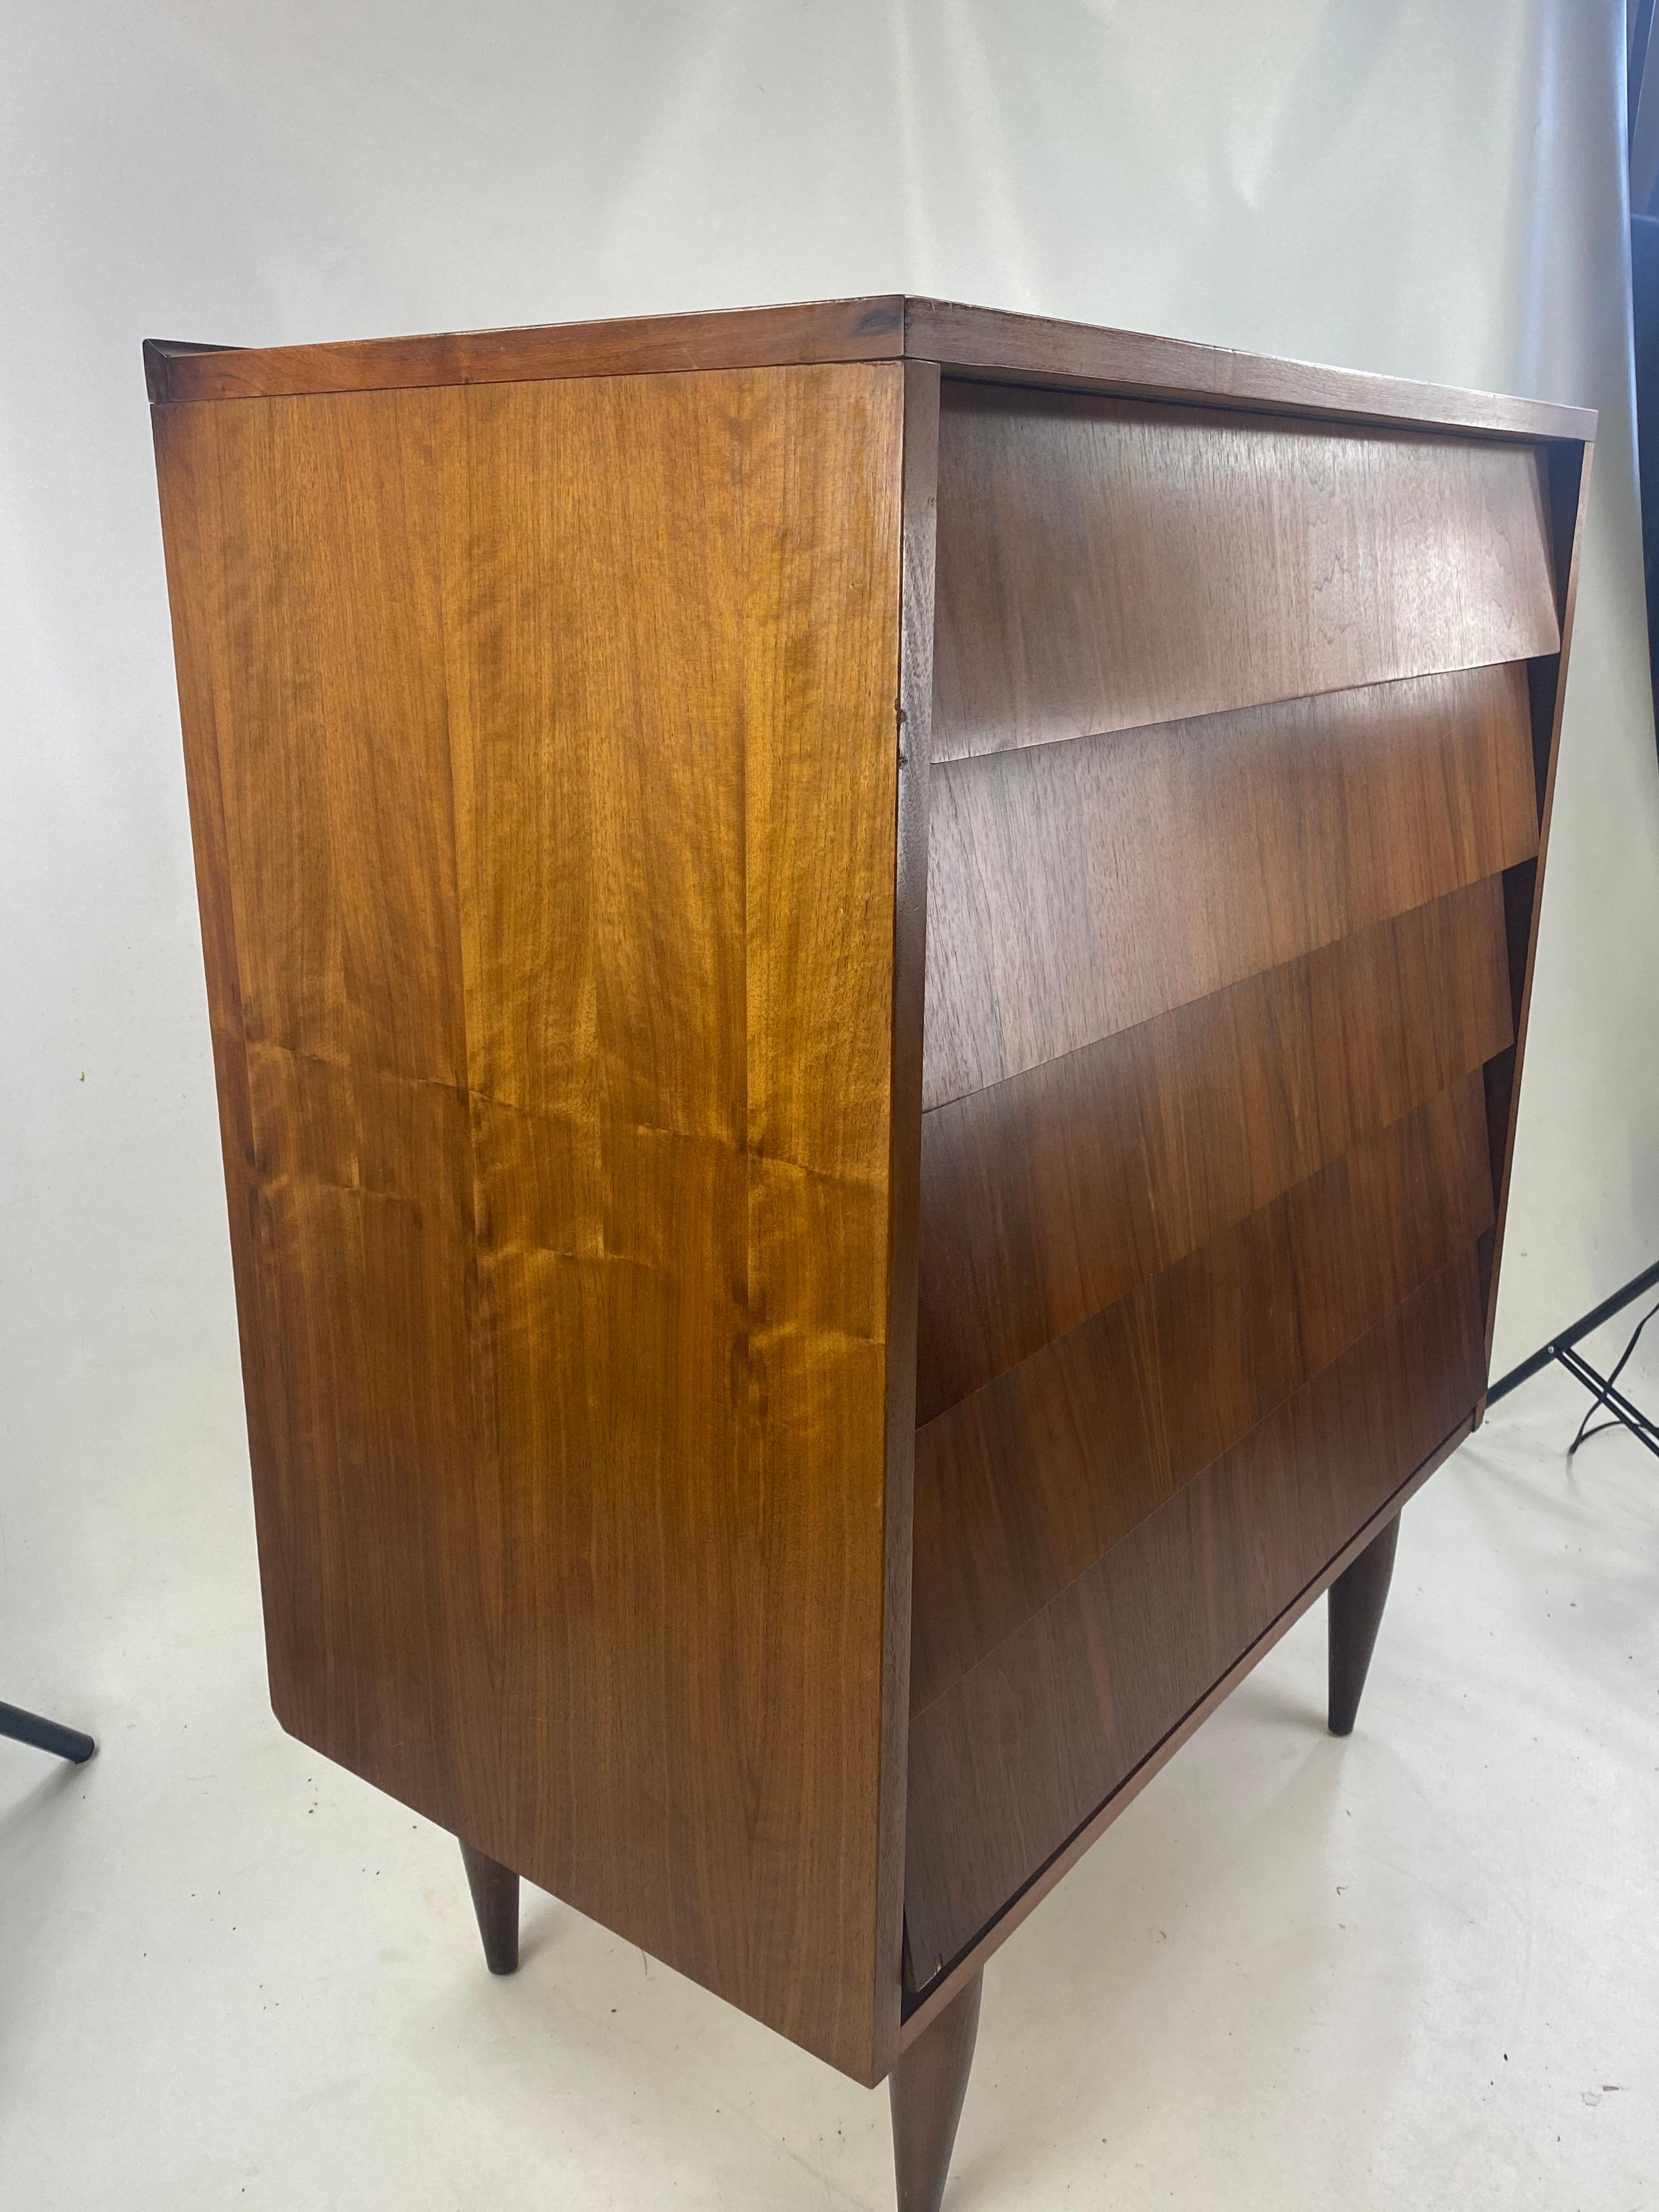 Midcentury walnut dresser with louvered drawers.